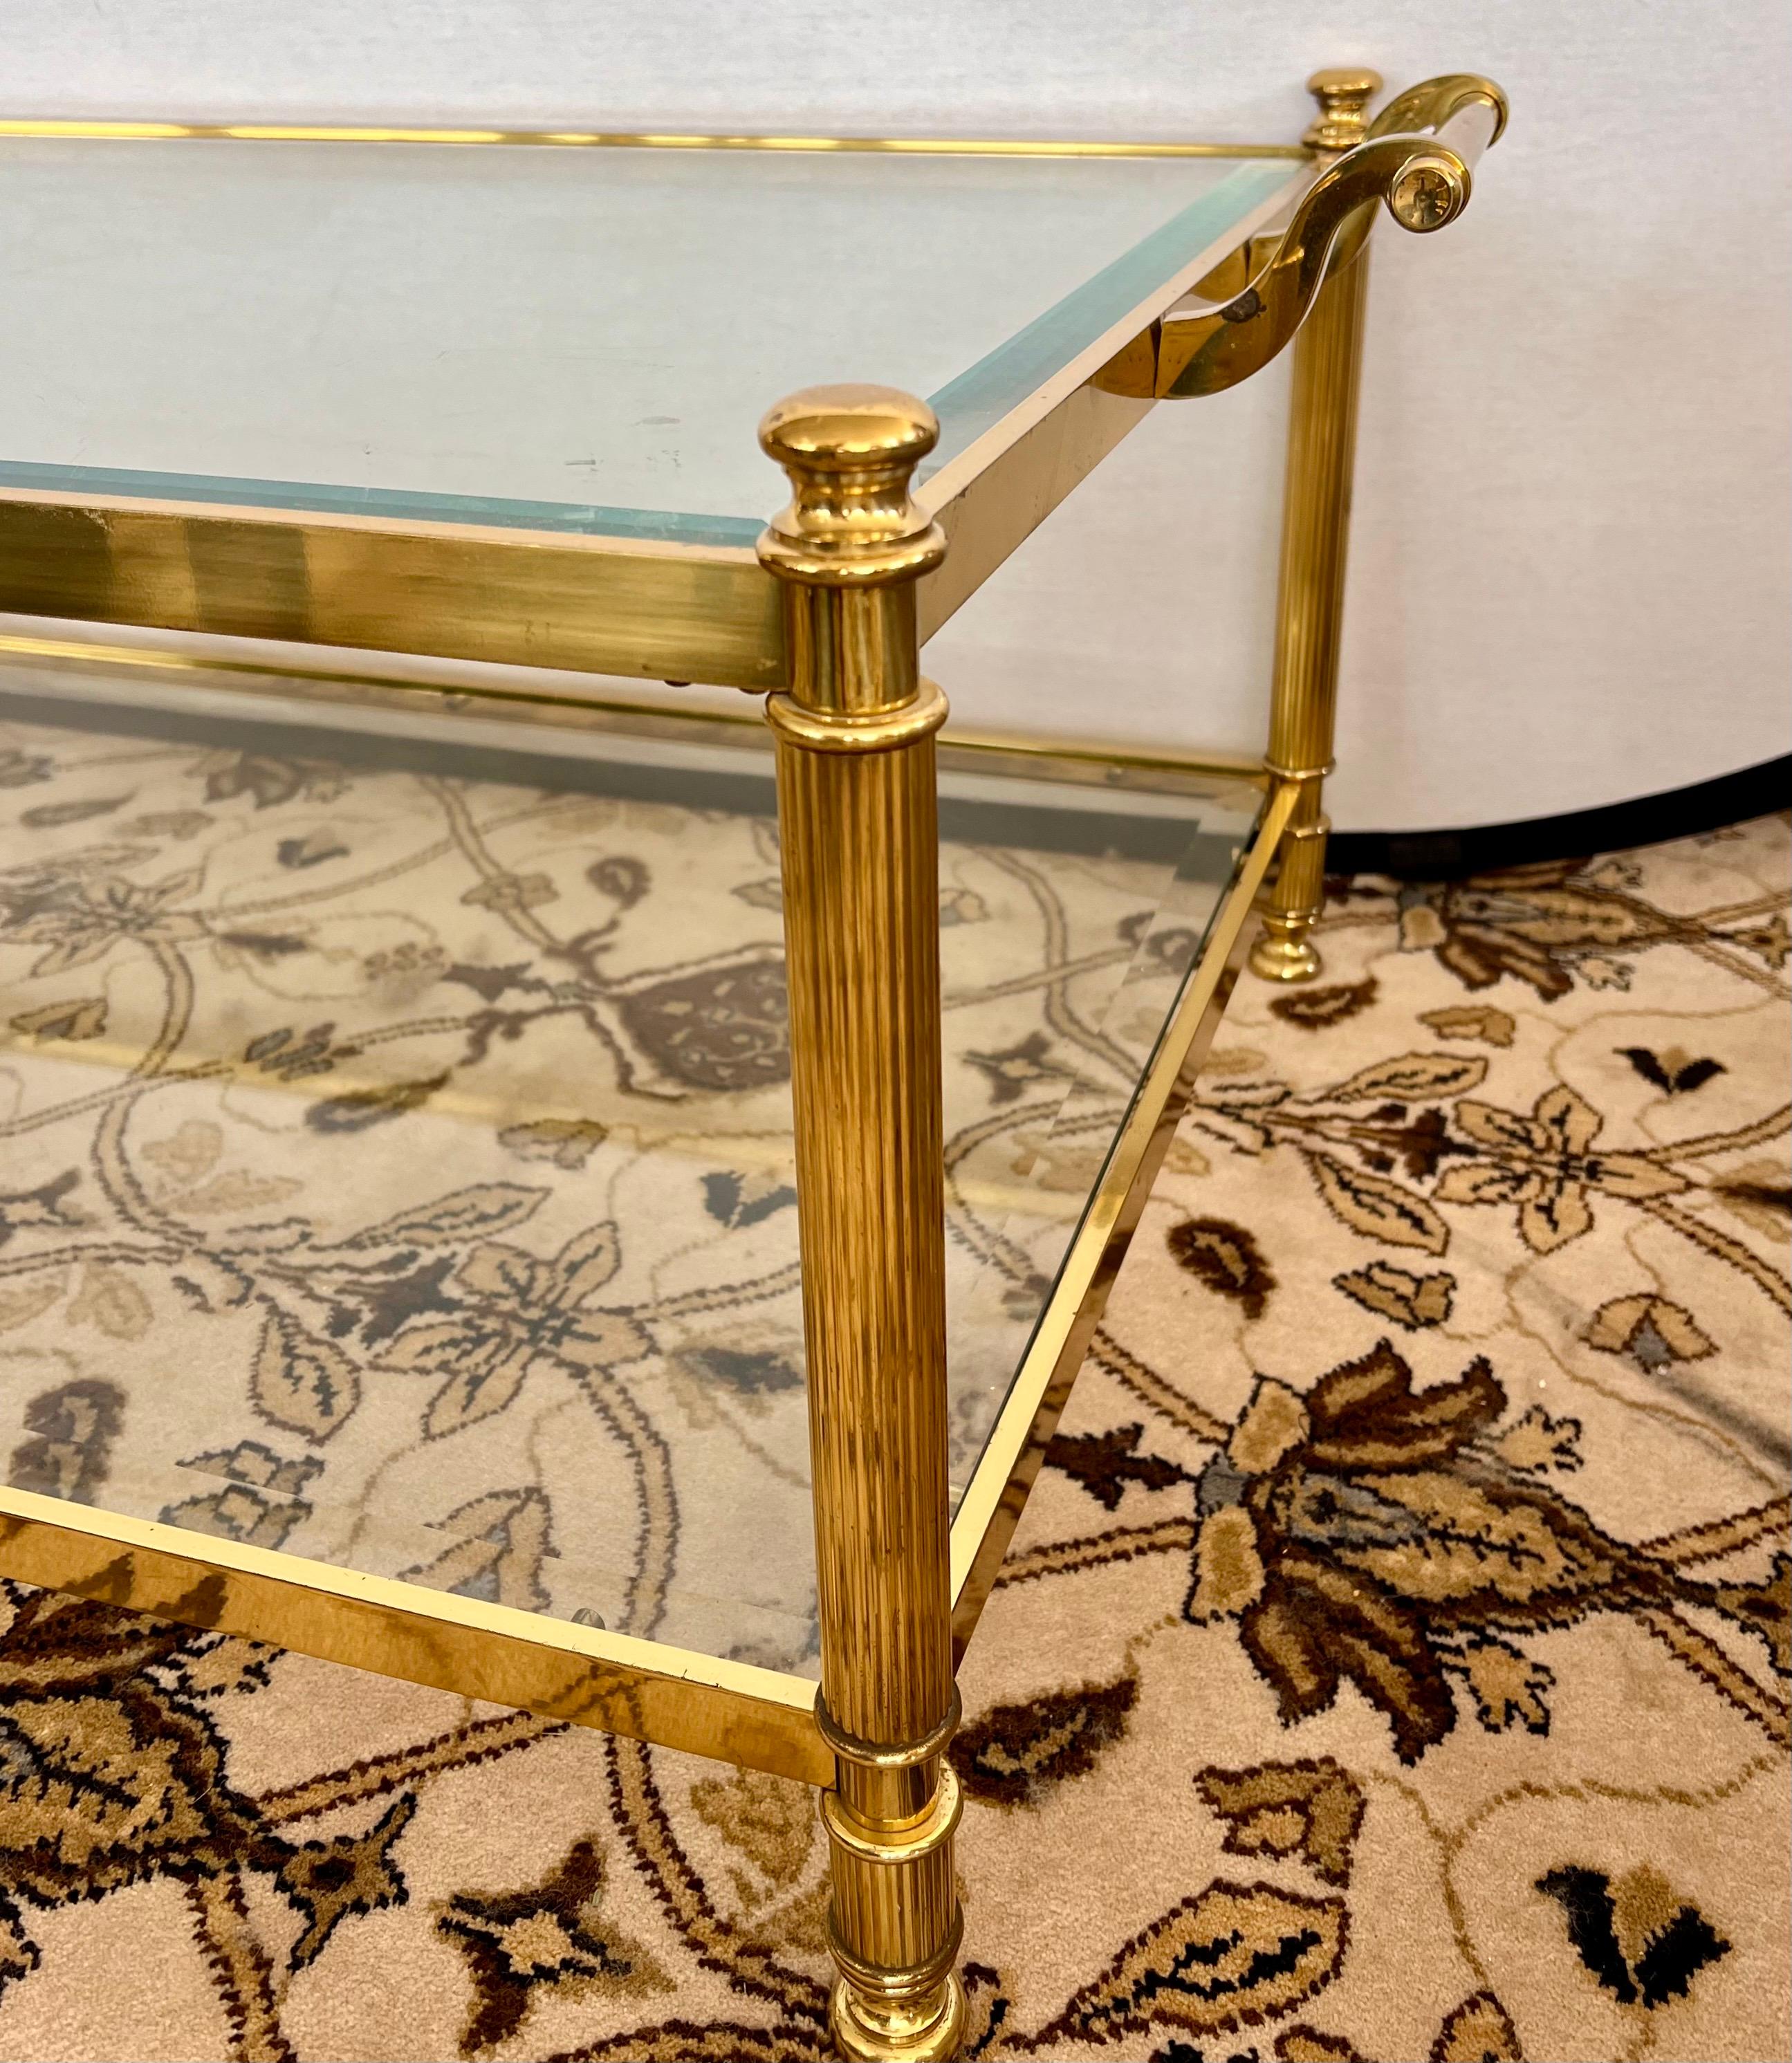 Two tiered brass and glass cocktail table with handles on each side.
Ideal for a modern or transitional aesthetic but quite honestly would pair well
with any luxury residence.  Why not own the best?